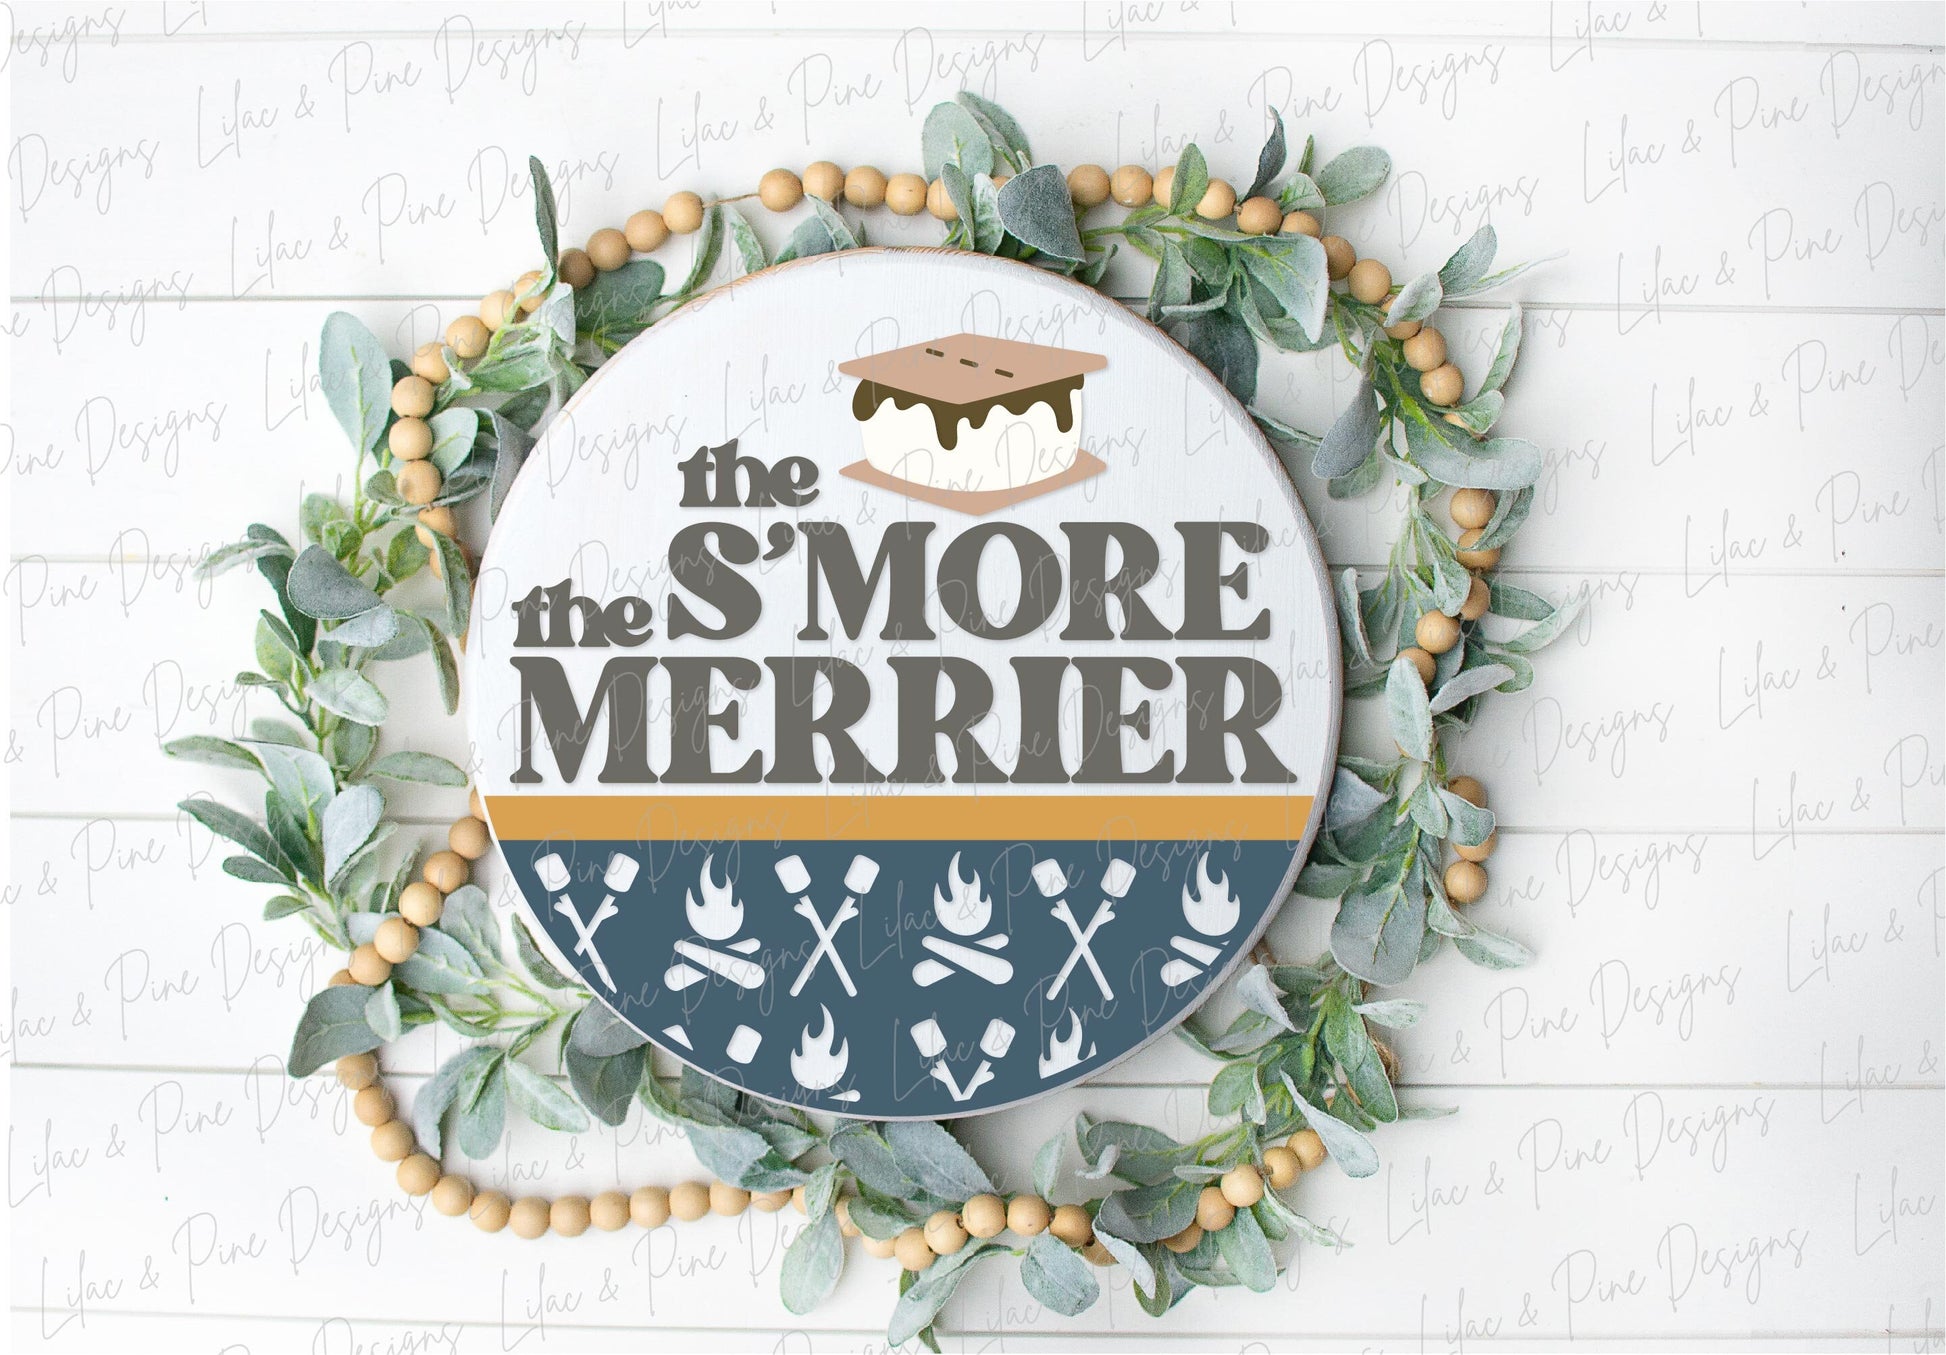 Smore the Merrier sign, Camping sign SVG, Campfire welcome sign, S'more door hanger, Funny round wood sign, Glowforge Svg, laser cut file